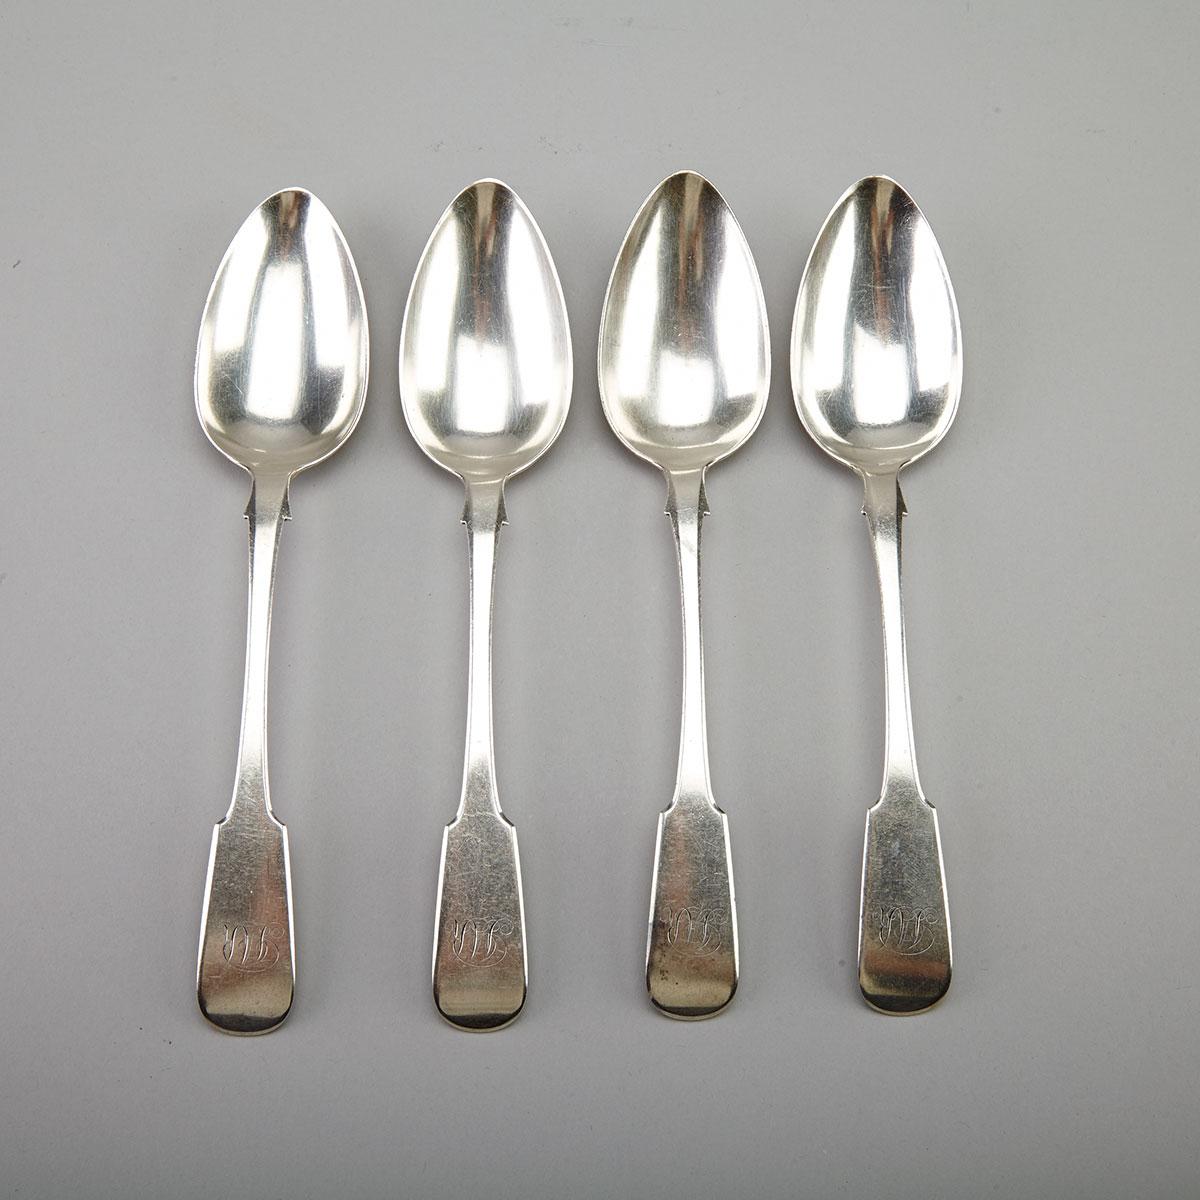 Four Canadian Silver Fiddle Pattern Table Spoons, George Savage & Son, Montreal, Que., c.1829-43